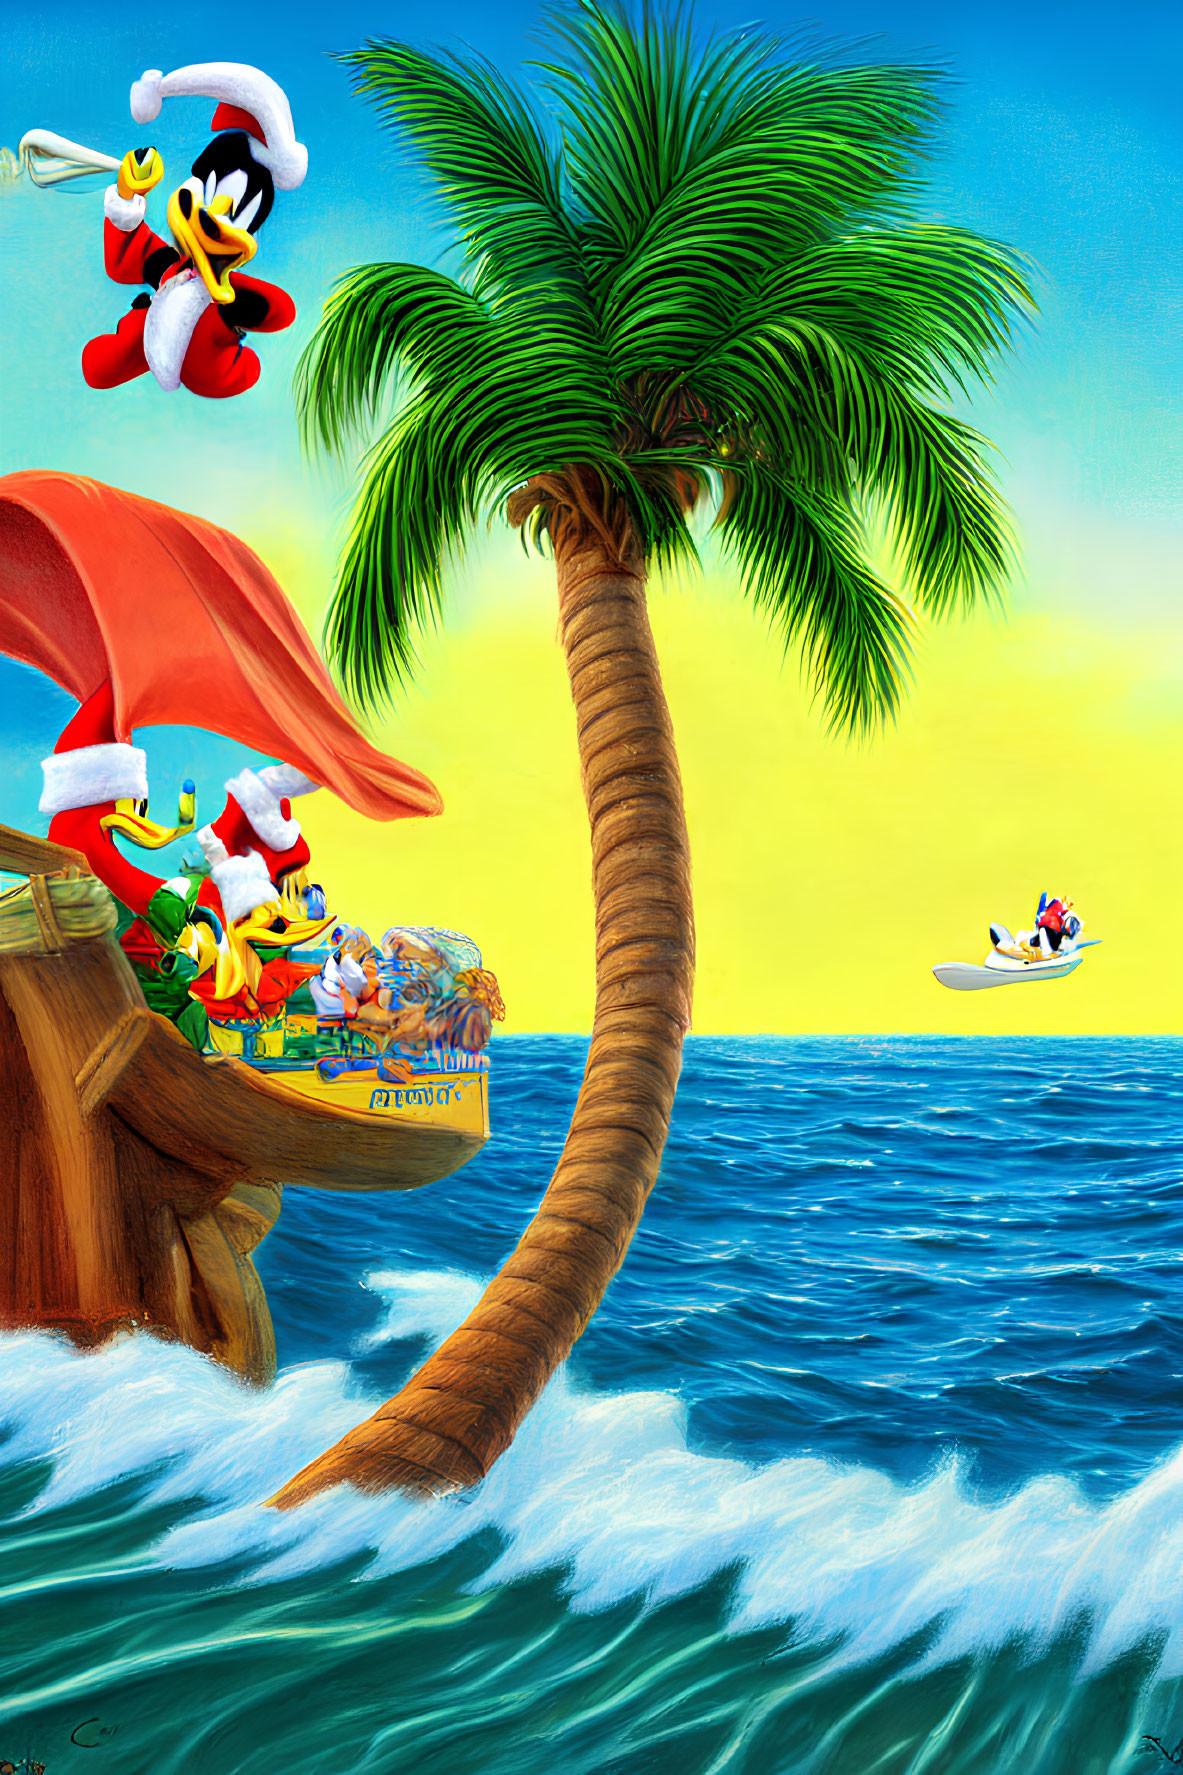 Colorful Cartoon Characters at Beach with Tree, Surfing, Boat, Shipwreck